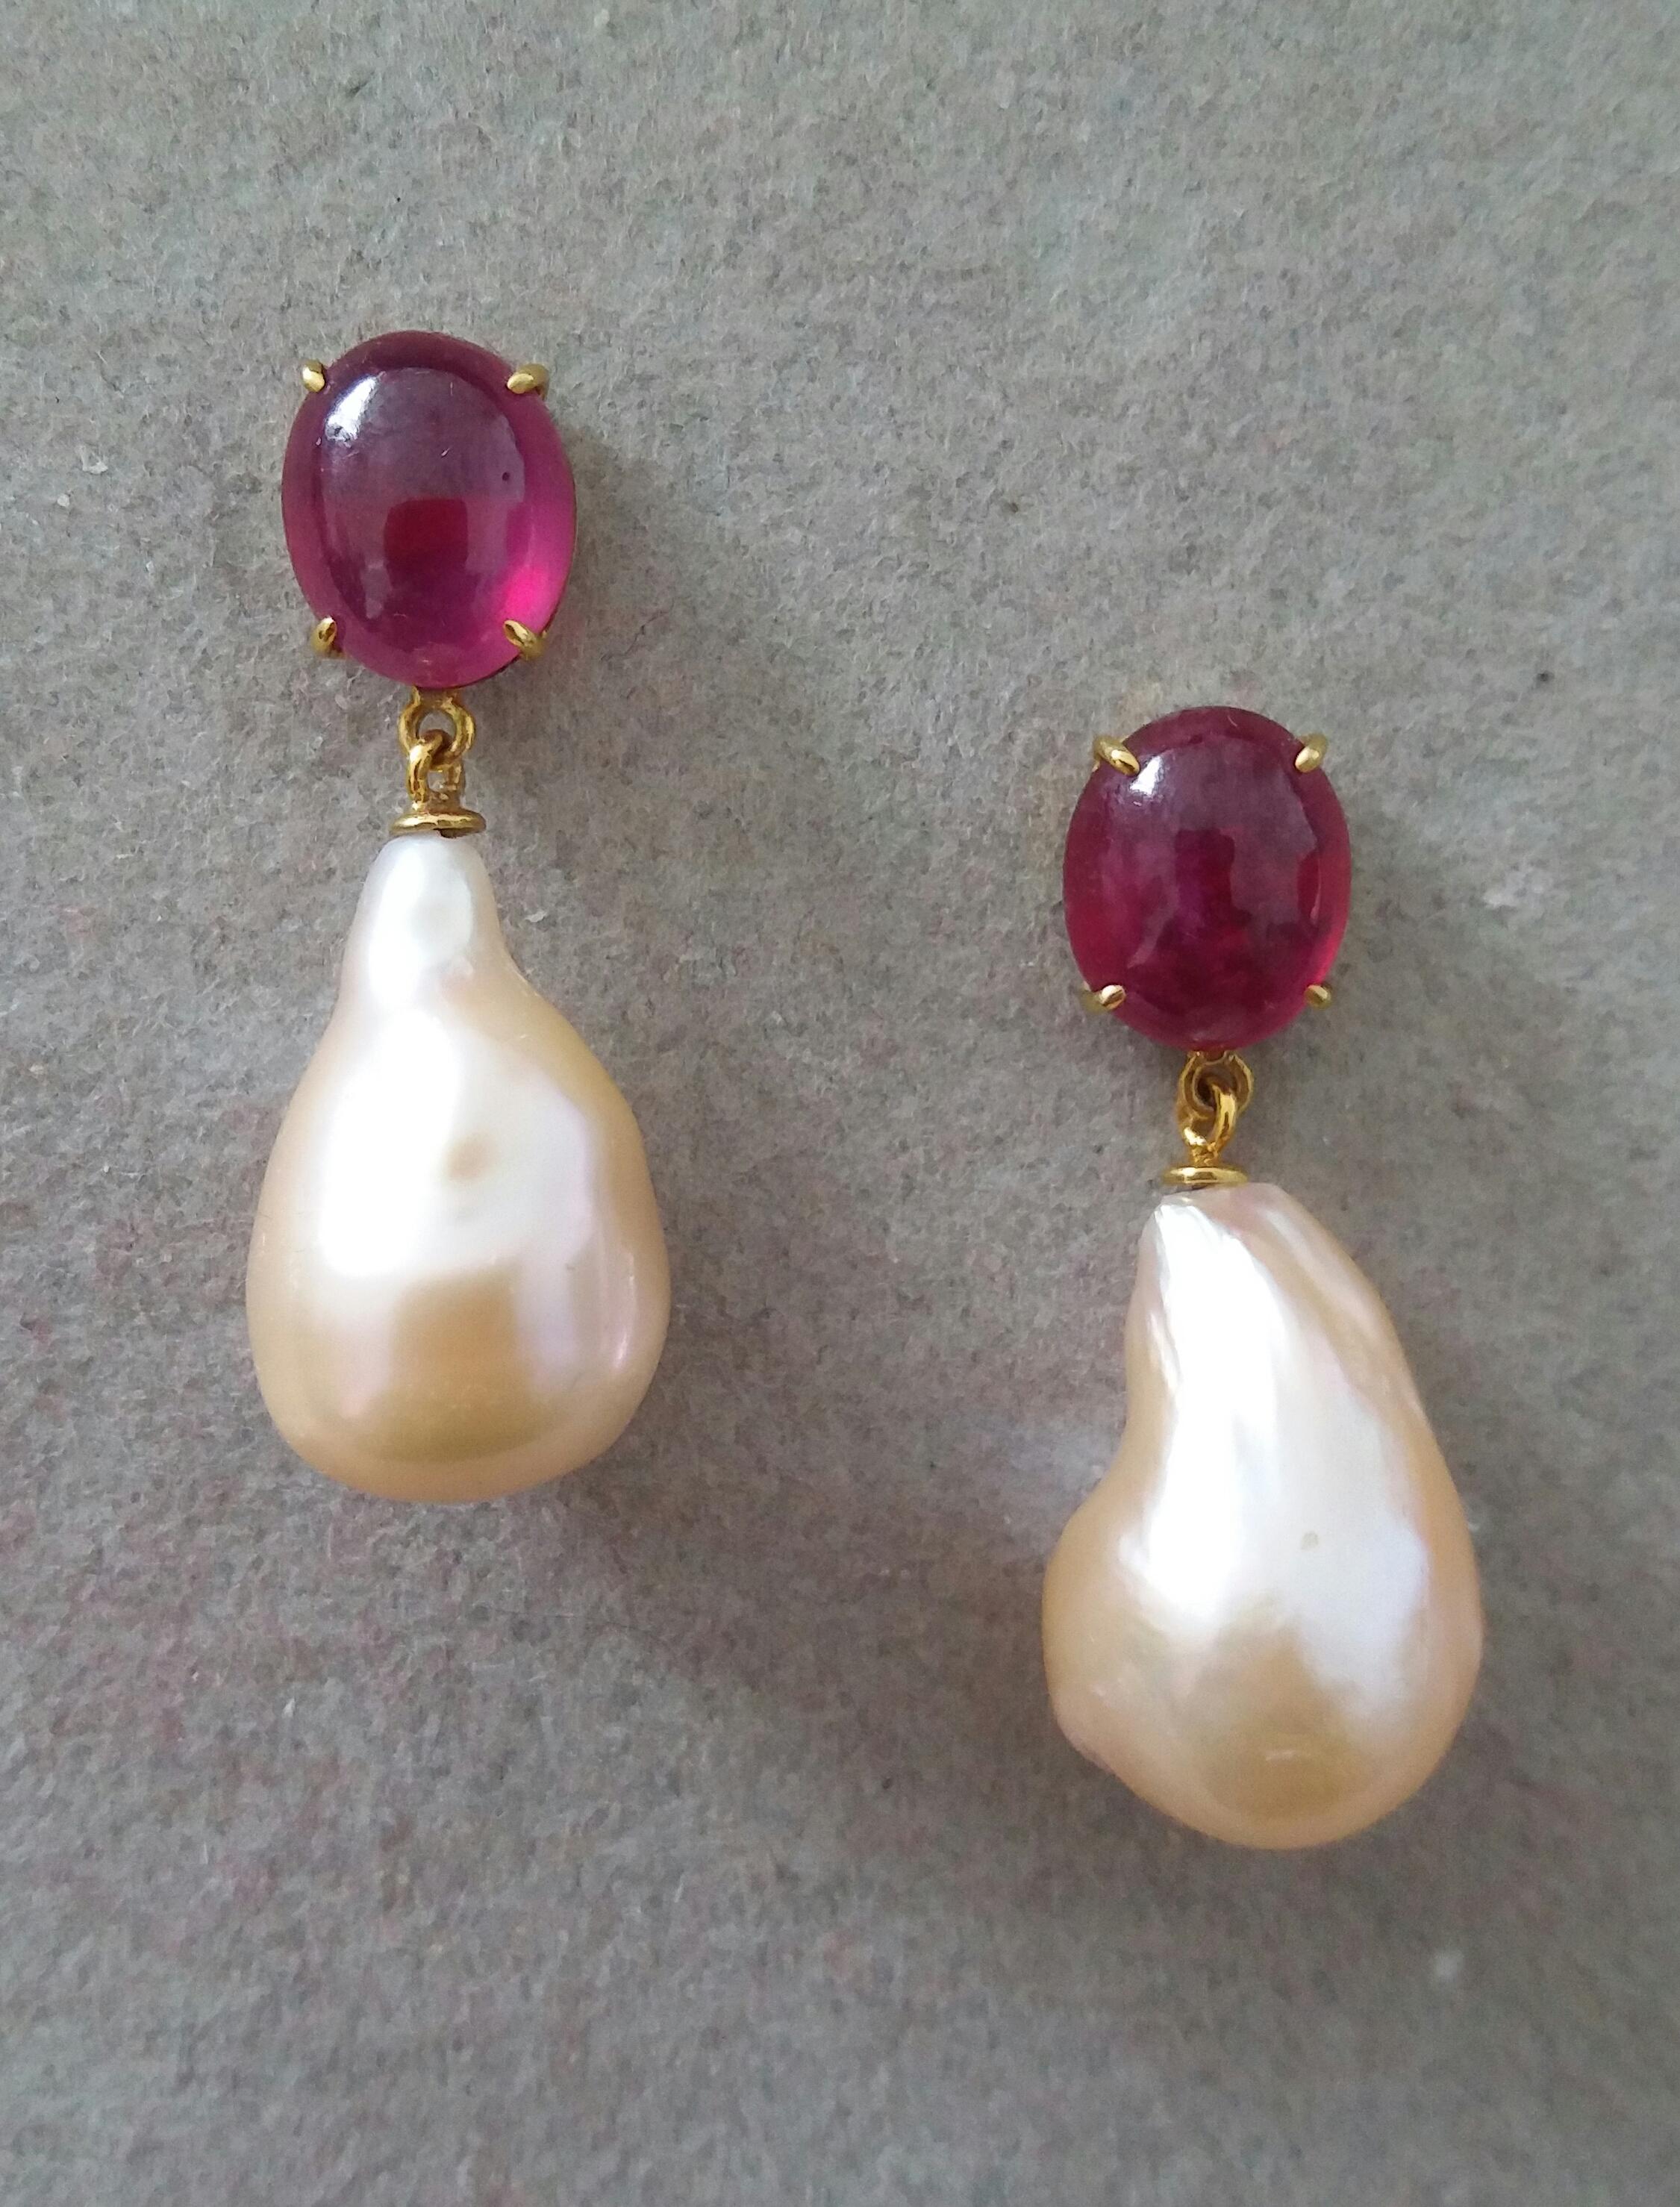 Big Size Pear Shape Cream Color Pearls Oval Ruby Cabochon 14 Karat Gold Earrings For Sale 5